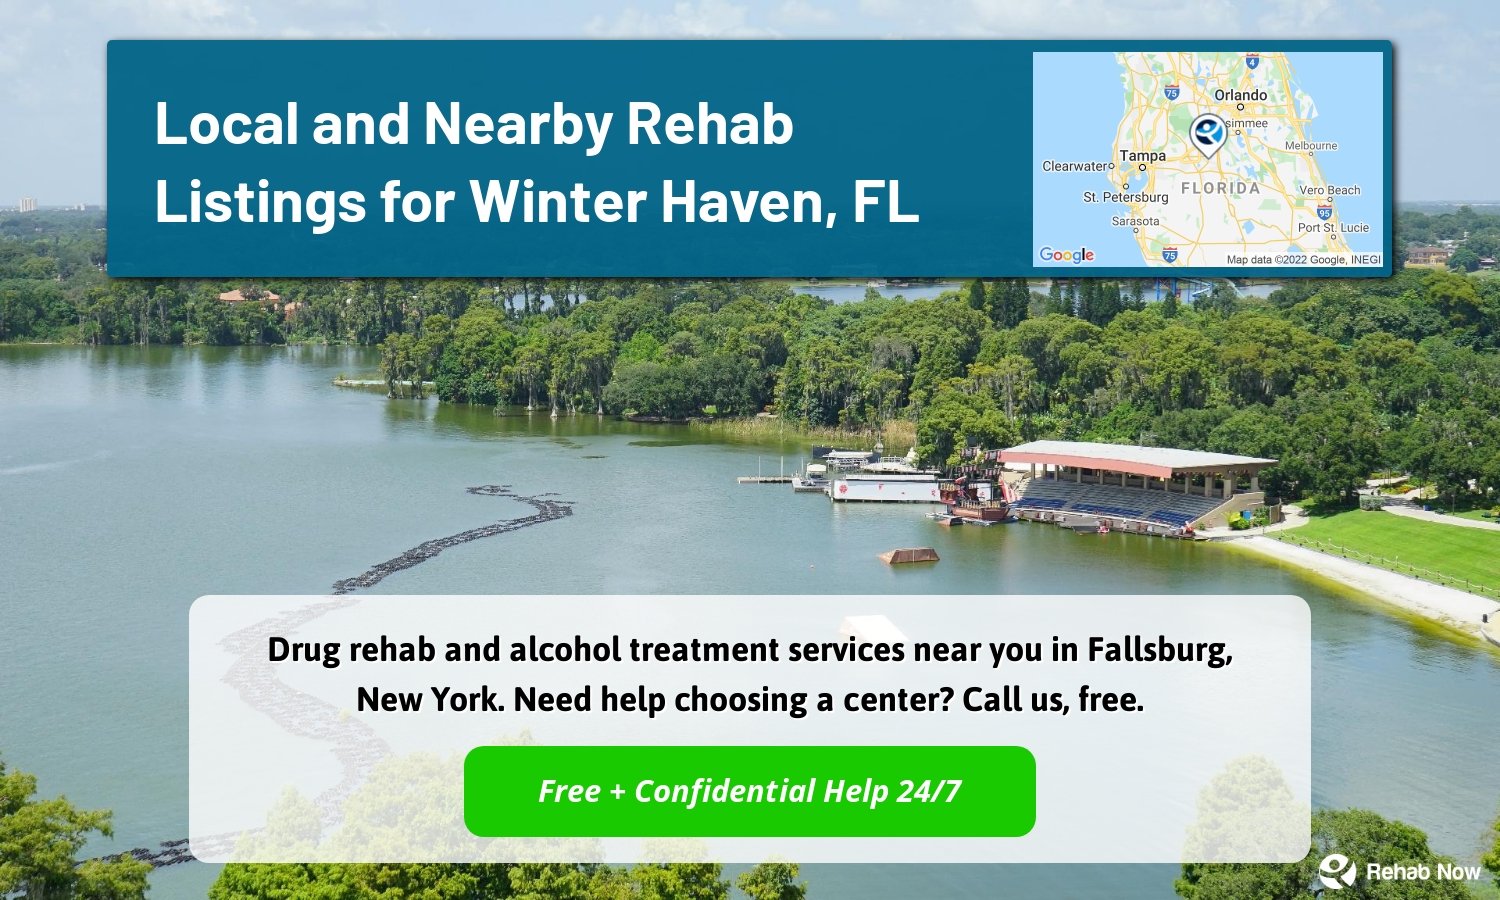 Drug rehab and alcohol treatment services near you in Fallsburg, New York. Need help choosing a center? Call us, free.